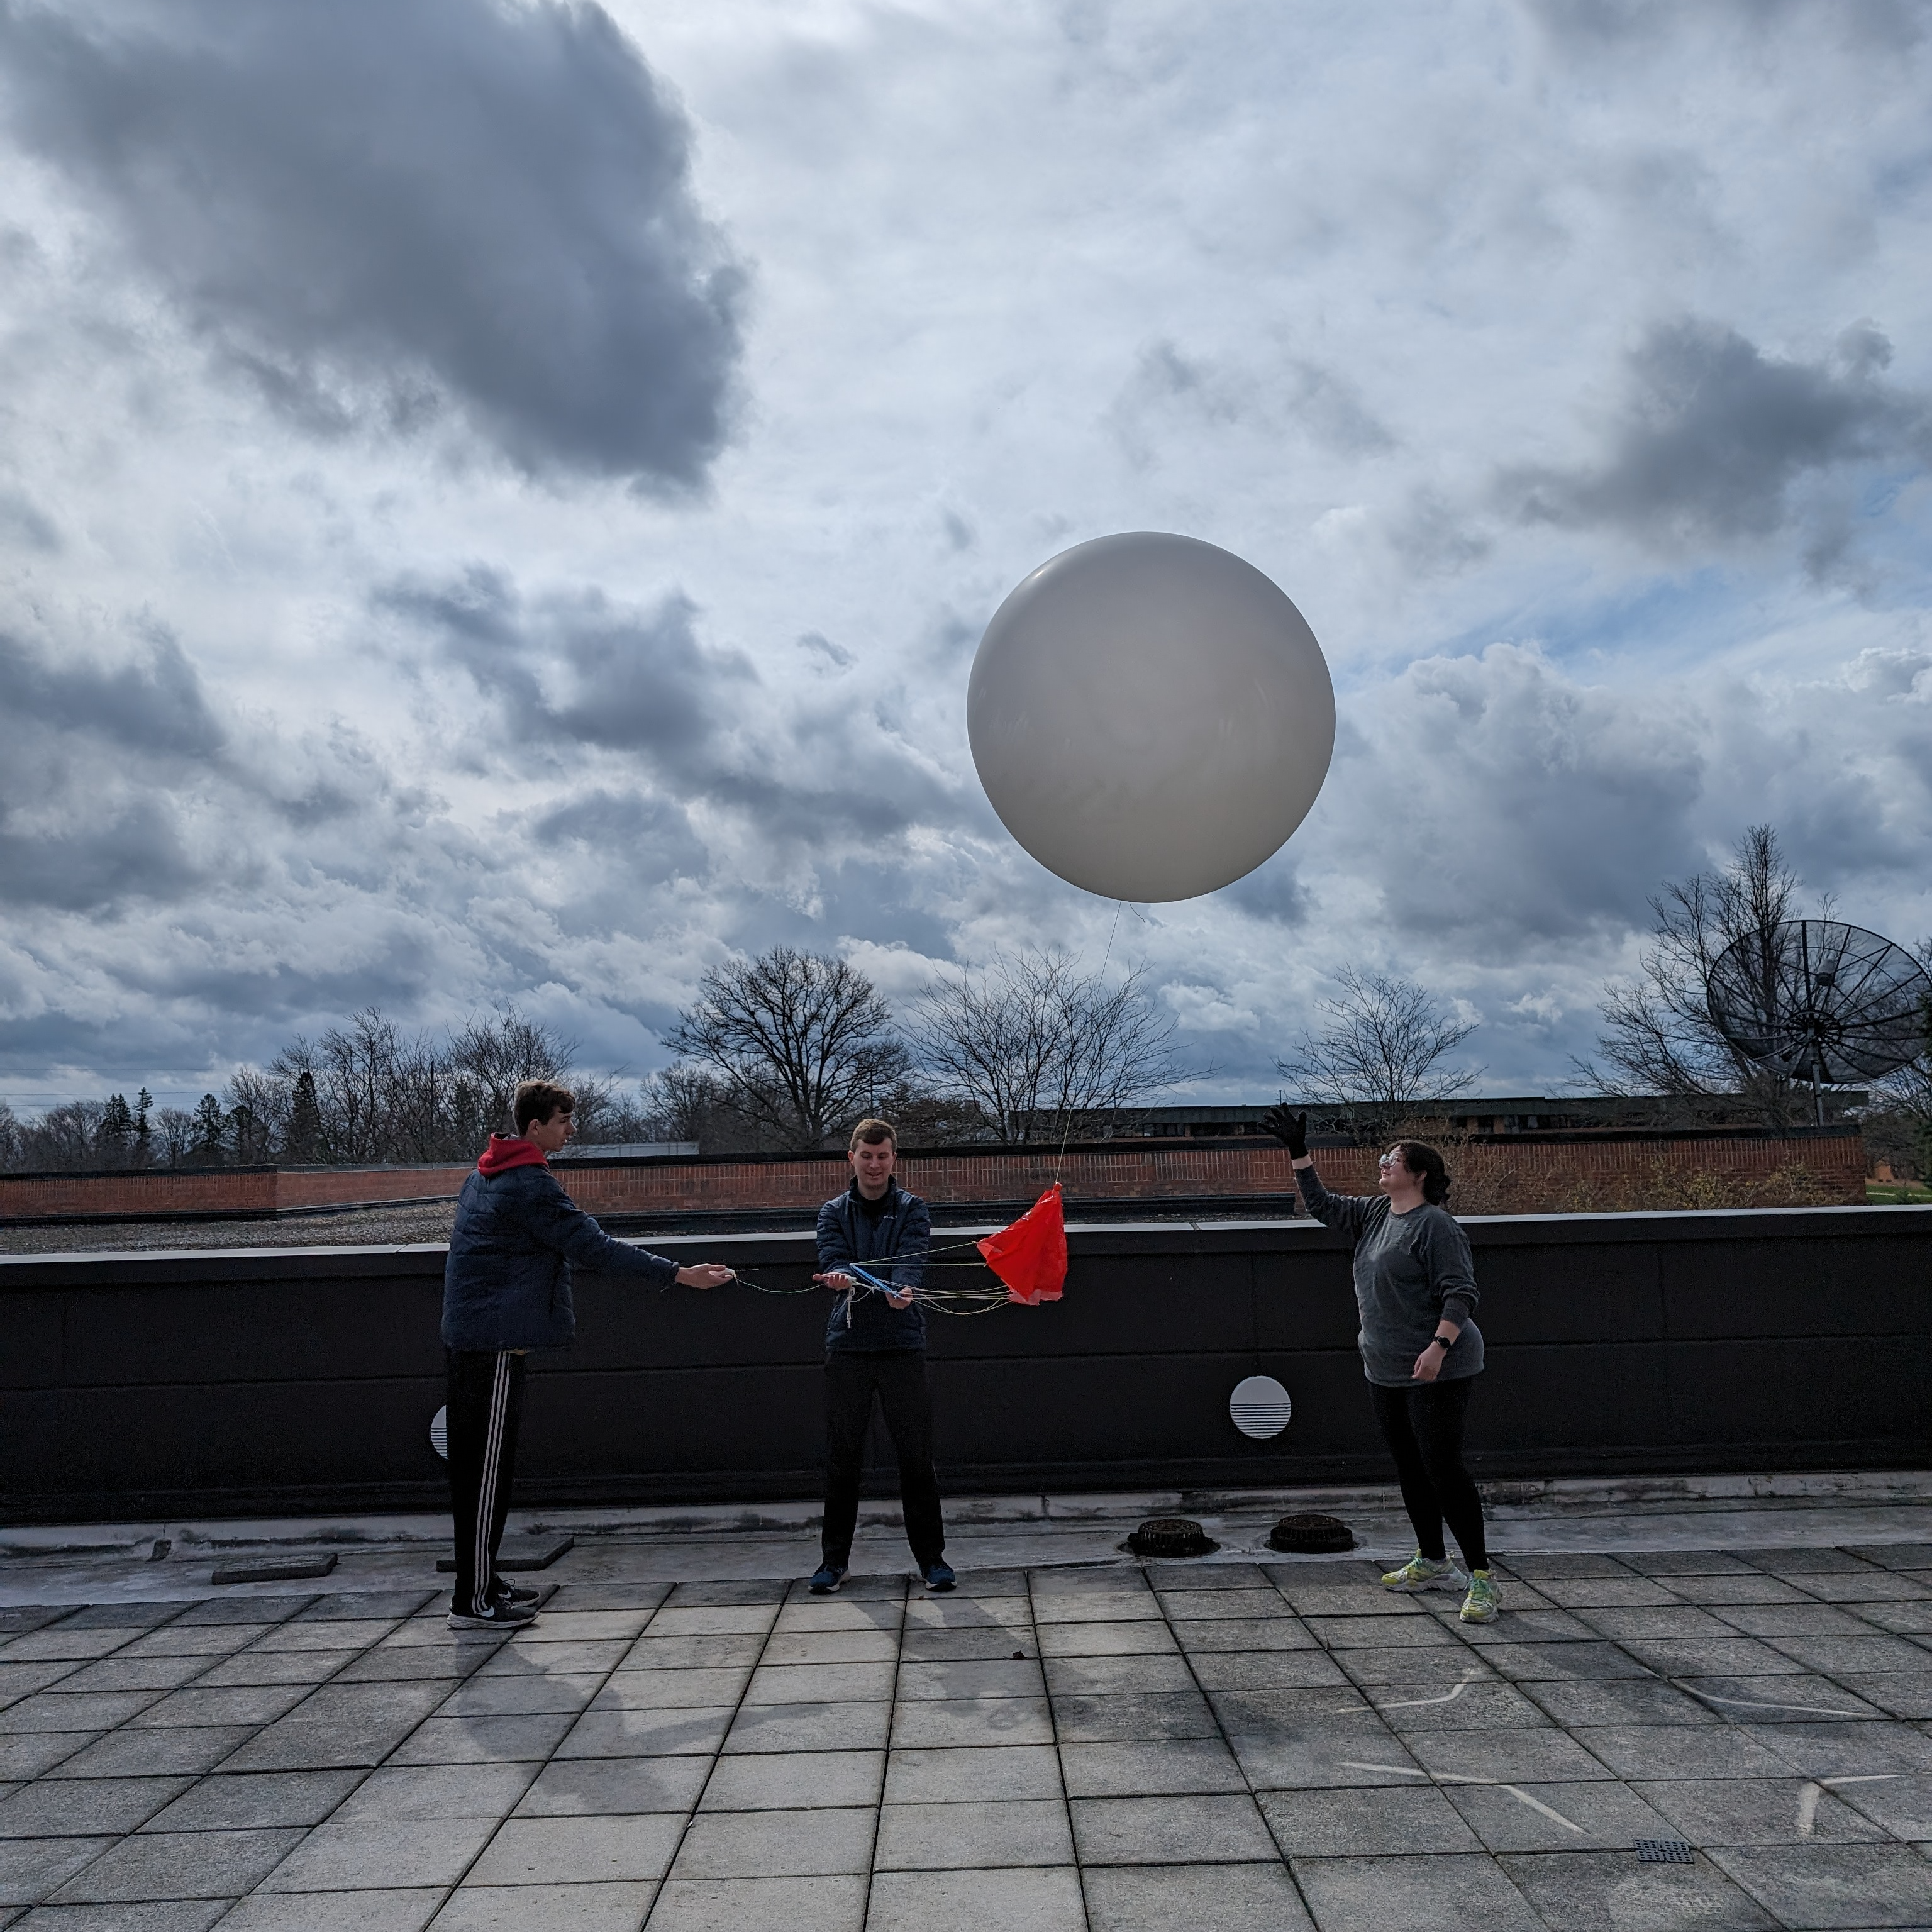 Weather balloon launch on the observation deck